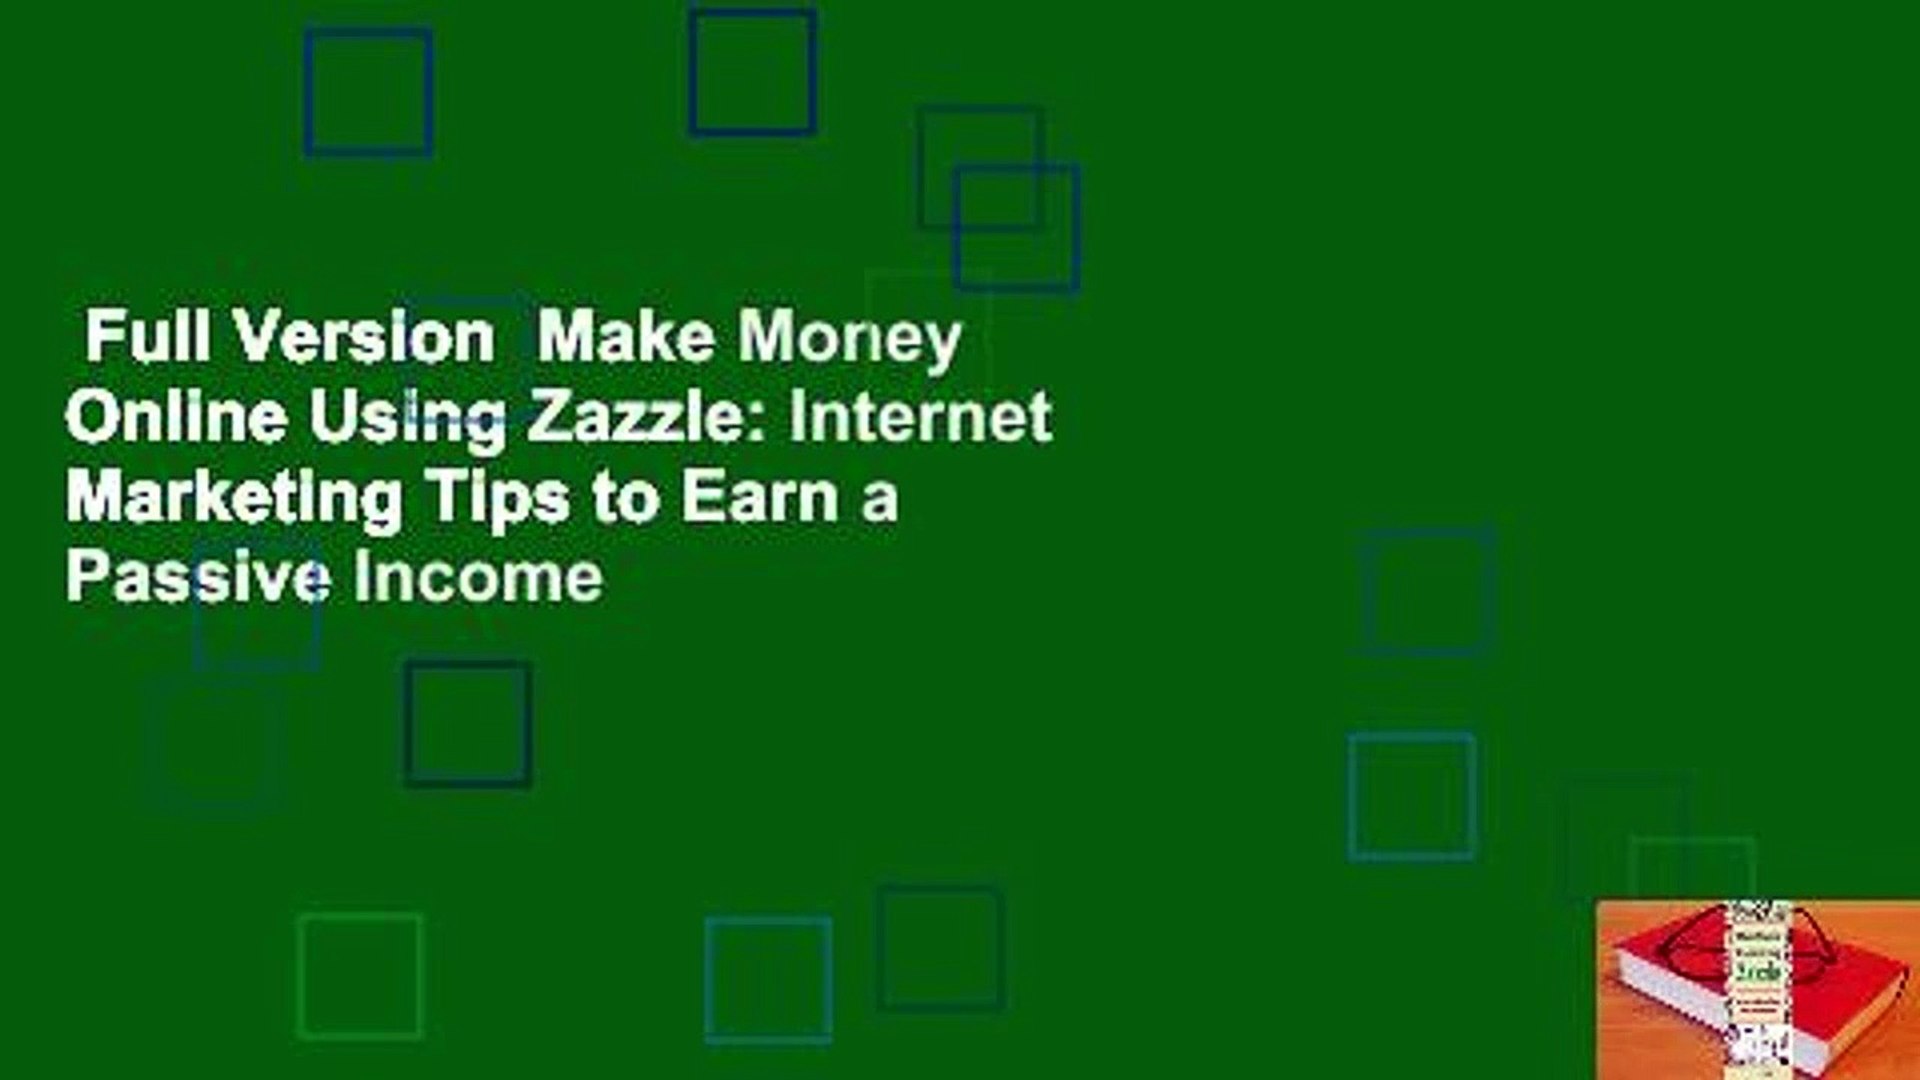 Make Money OnlineFrom Newbie To MillionaireAn internet marketing  success system explained in easy steps by self made millionaire500 pages  of valuable content, techniques and tips on how to make